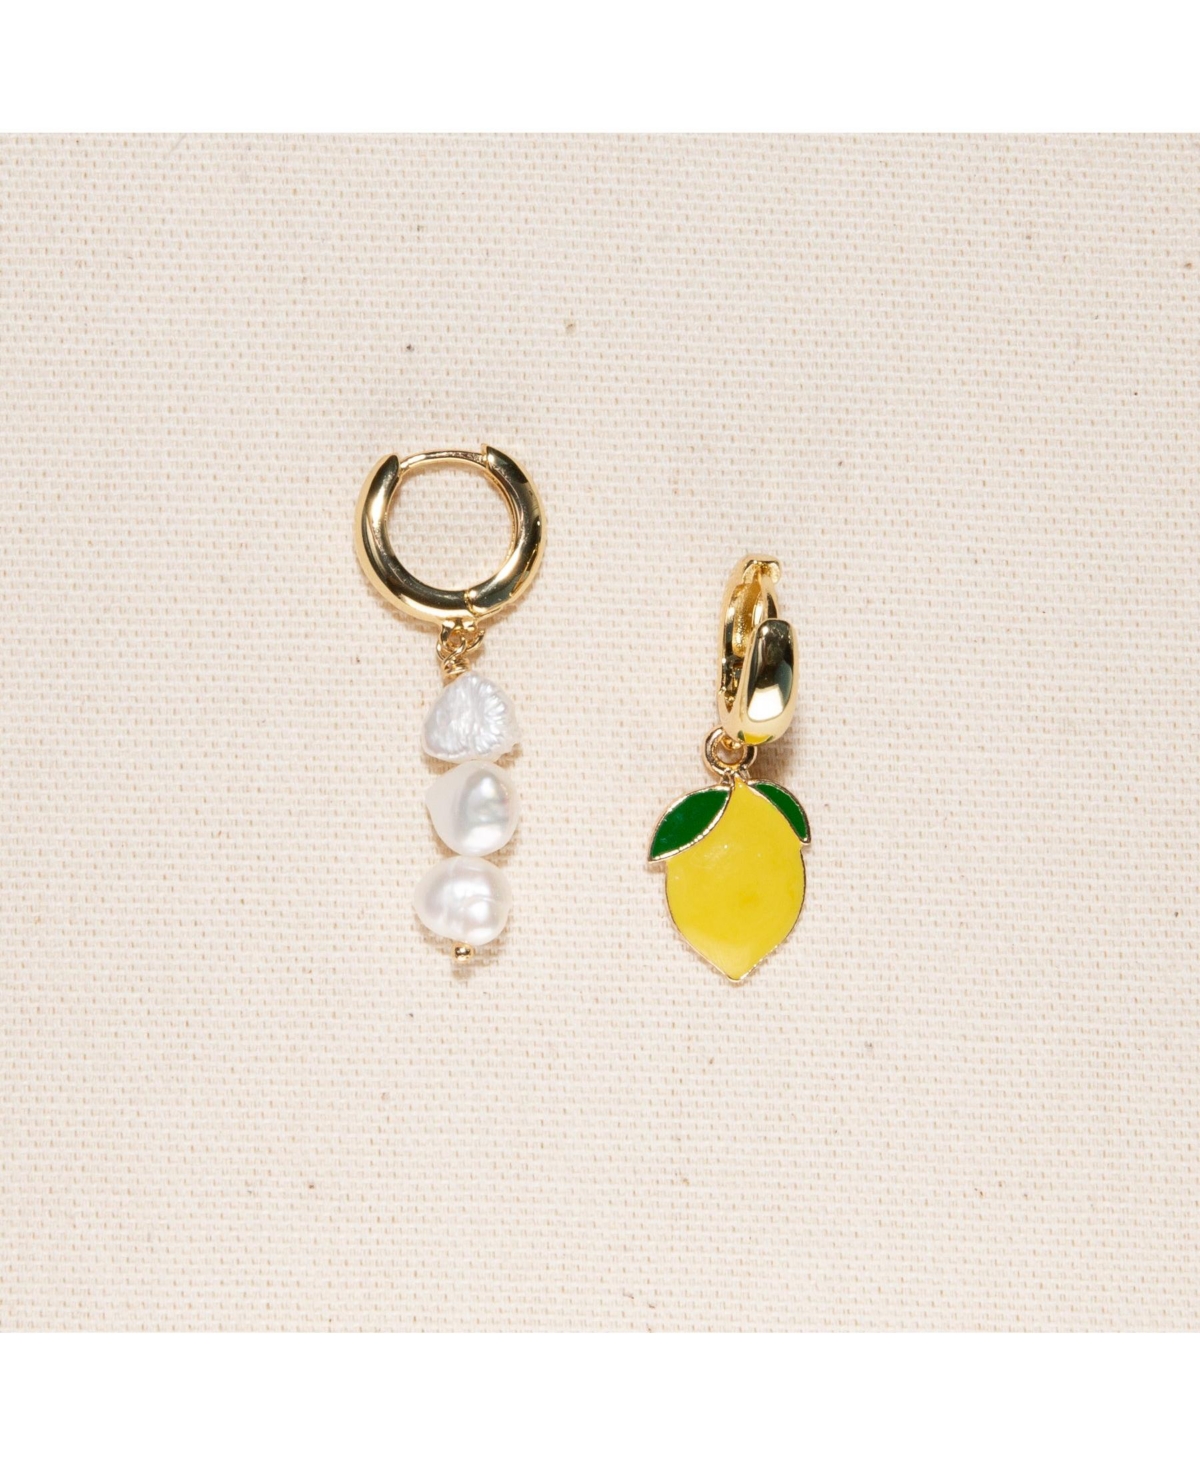 JOEY BABY 18K GOLD PLATED HUGGIES FRESHWATER PEARLS WITH A YELLOW AND GREEN LEMON CHARM